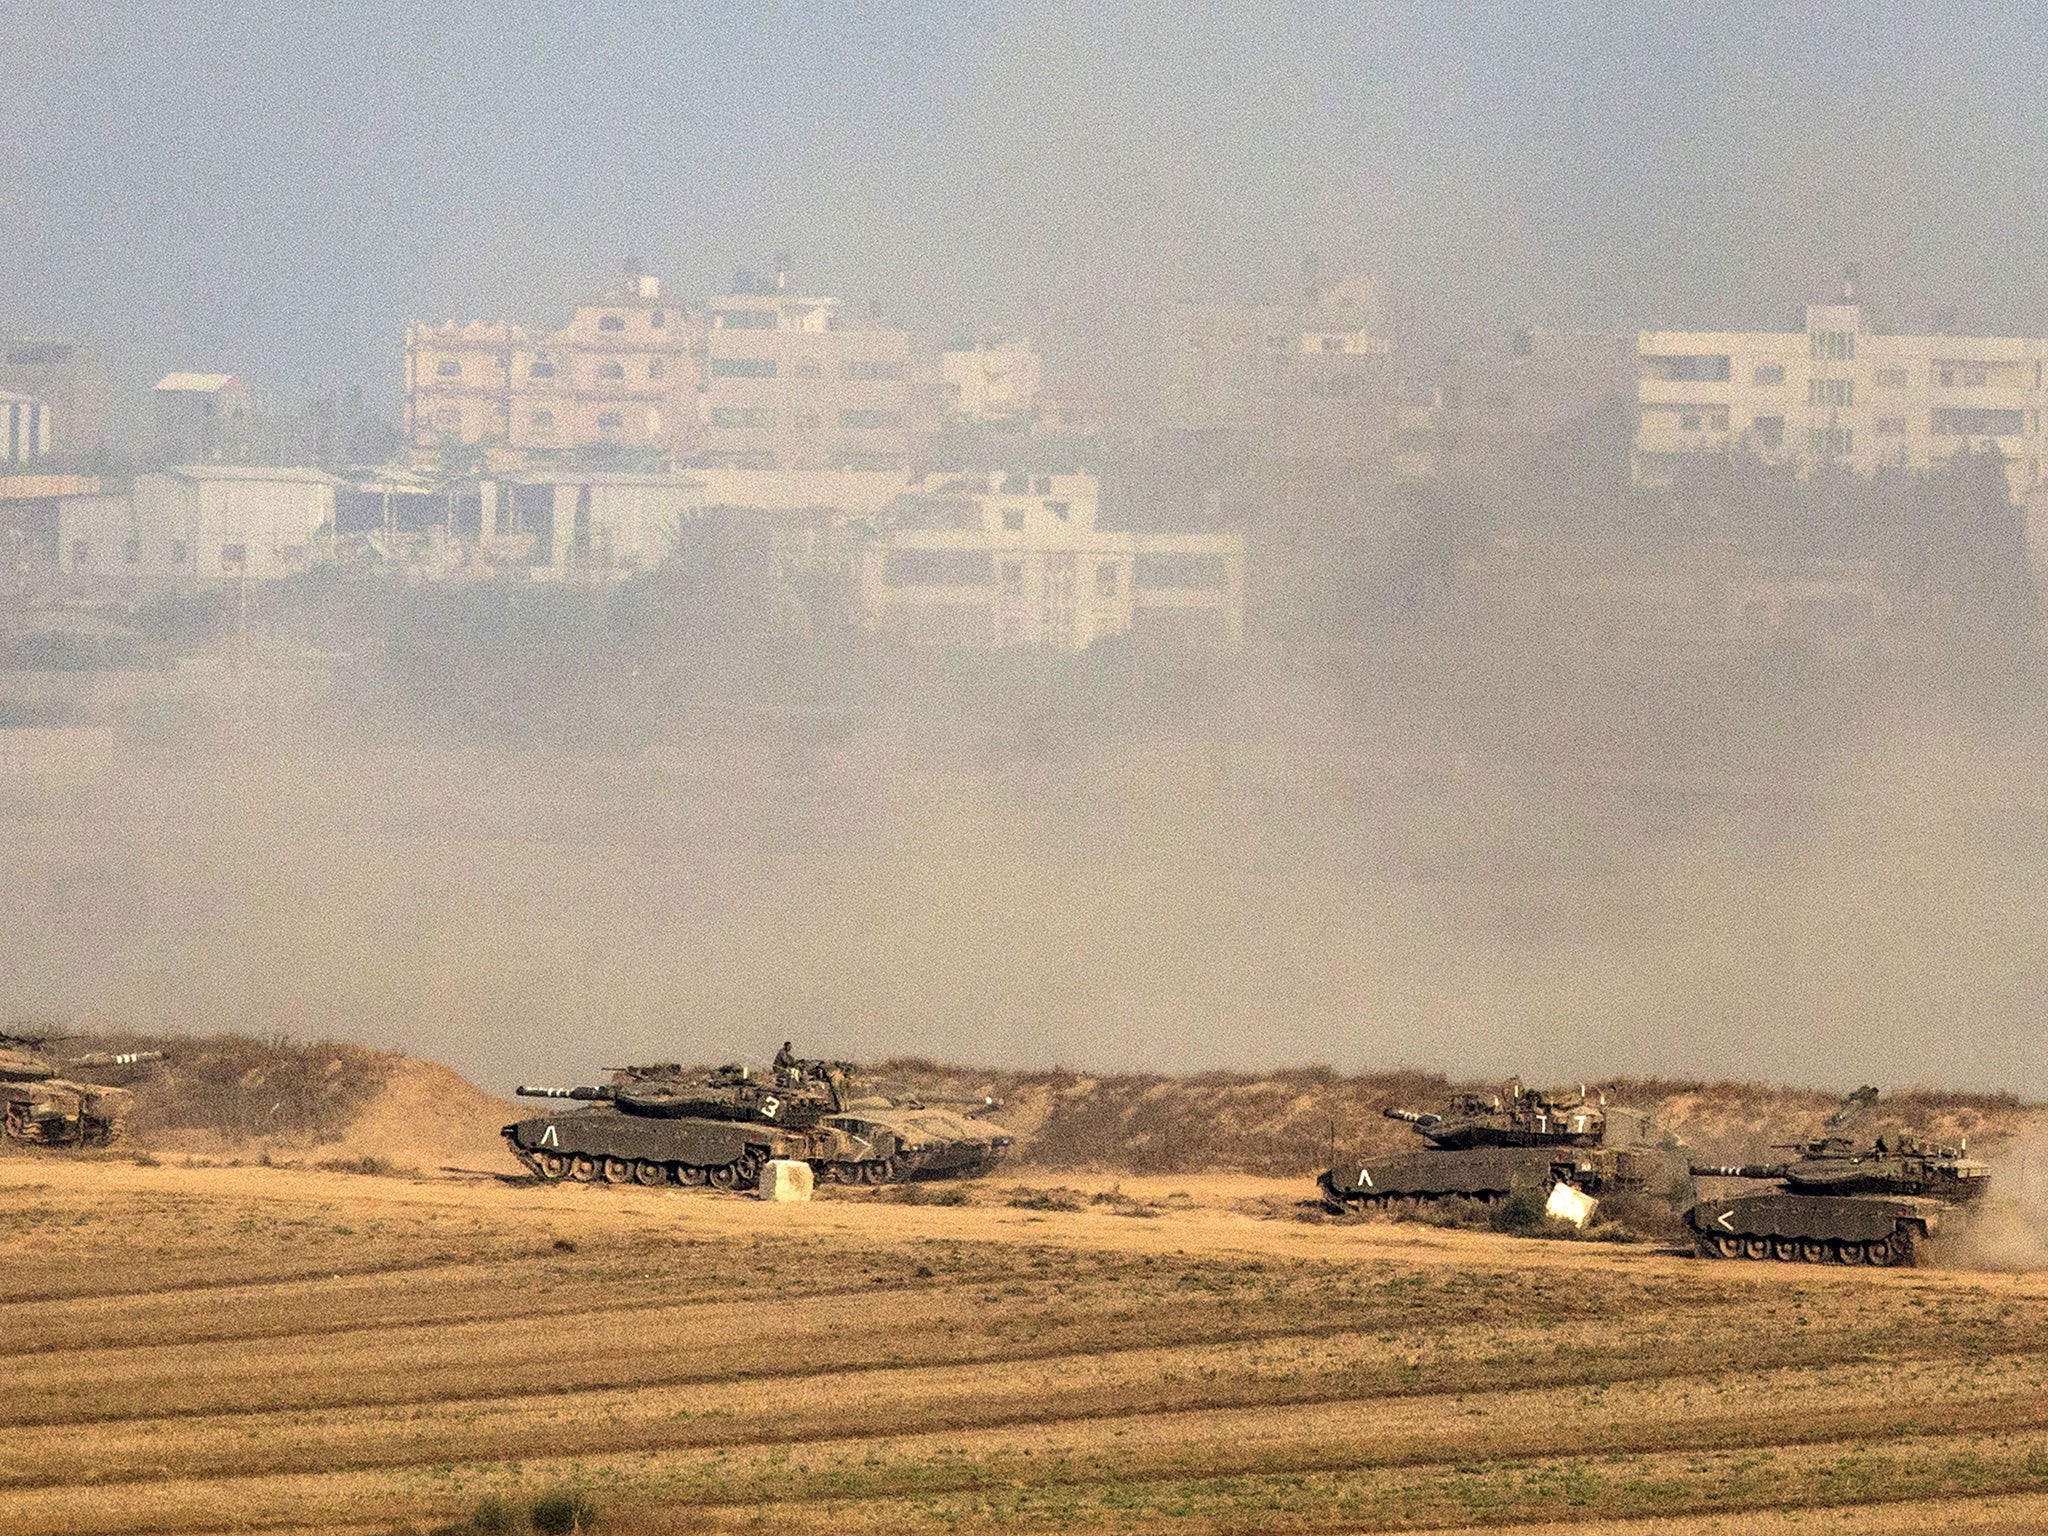 Israeli Merkava tanks fire at the Gaza Strip (background) from their position near Israel's border with the Strip on July 20, 2014